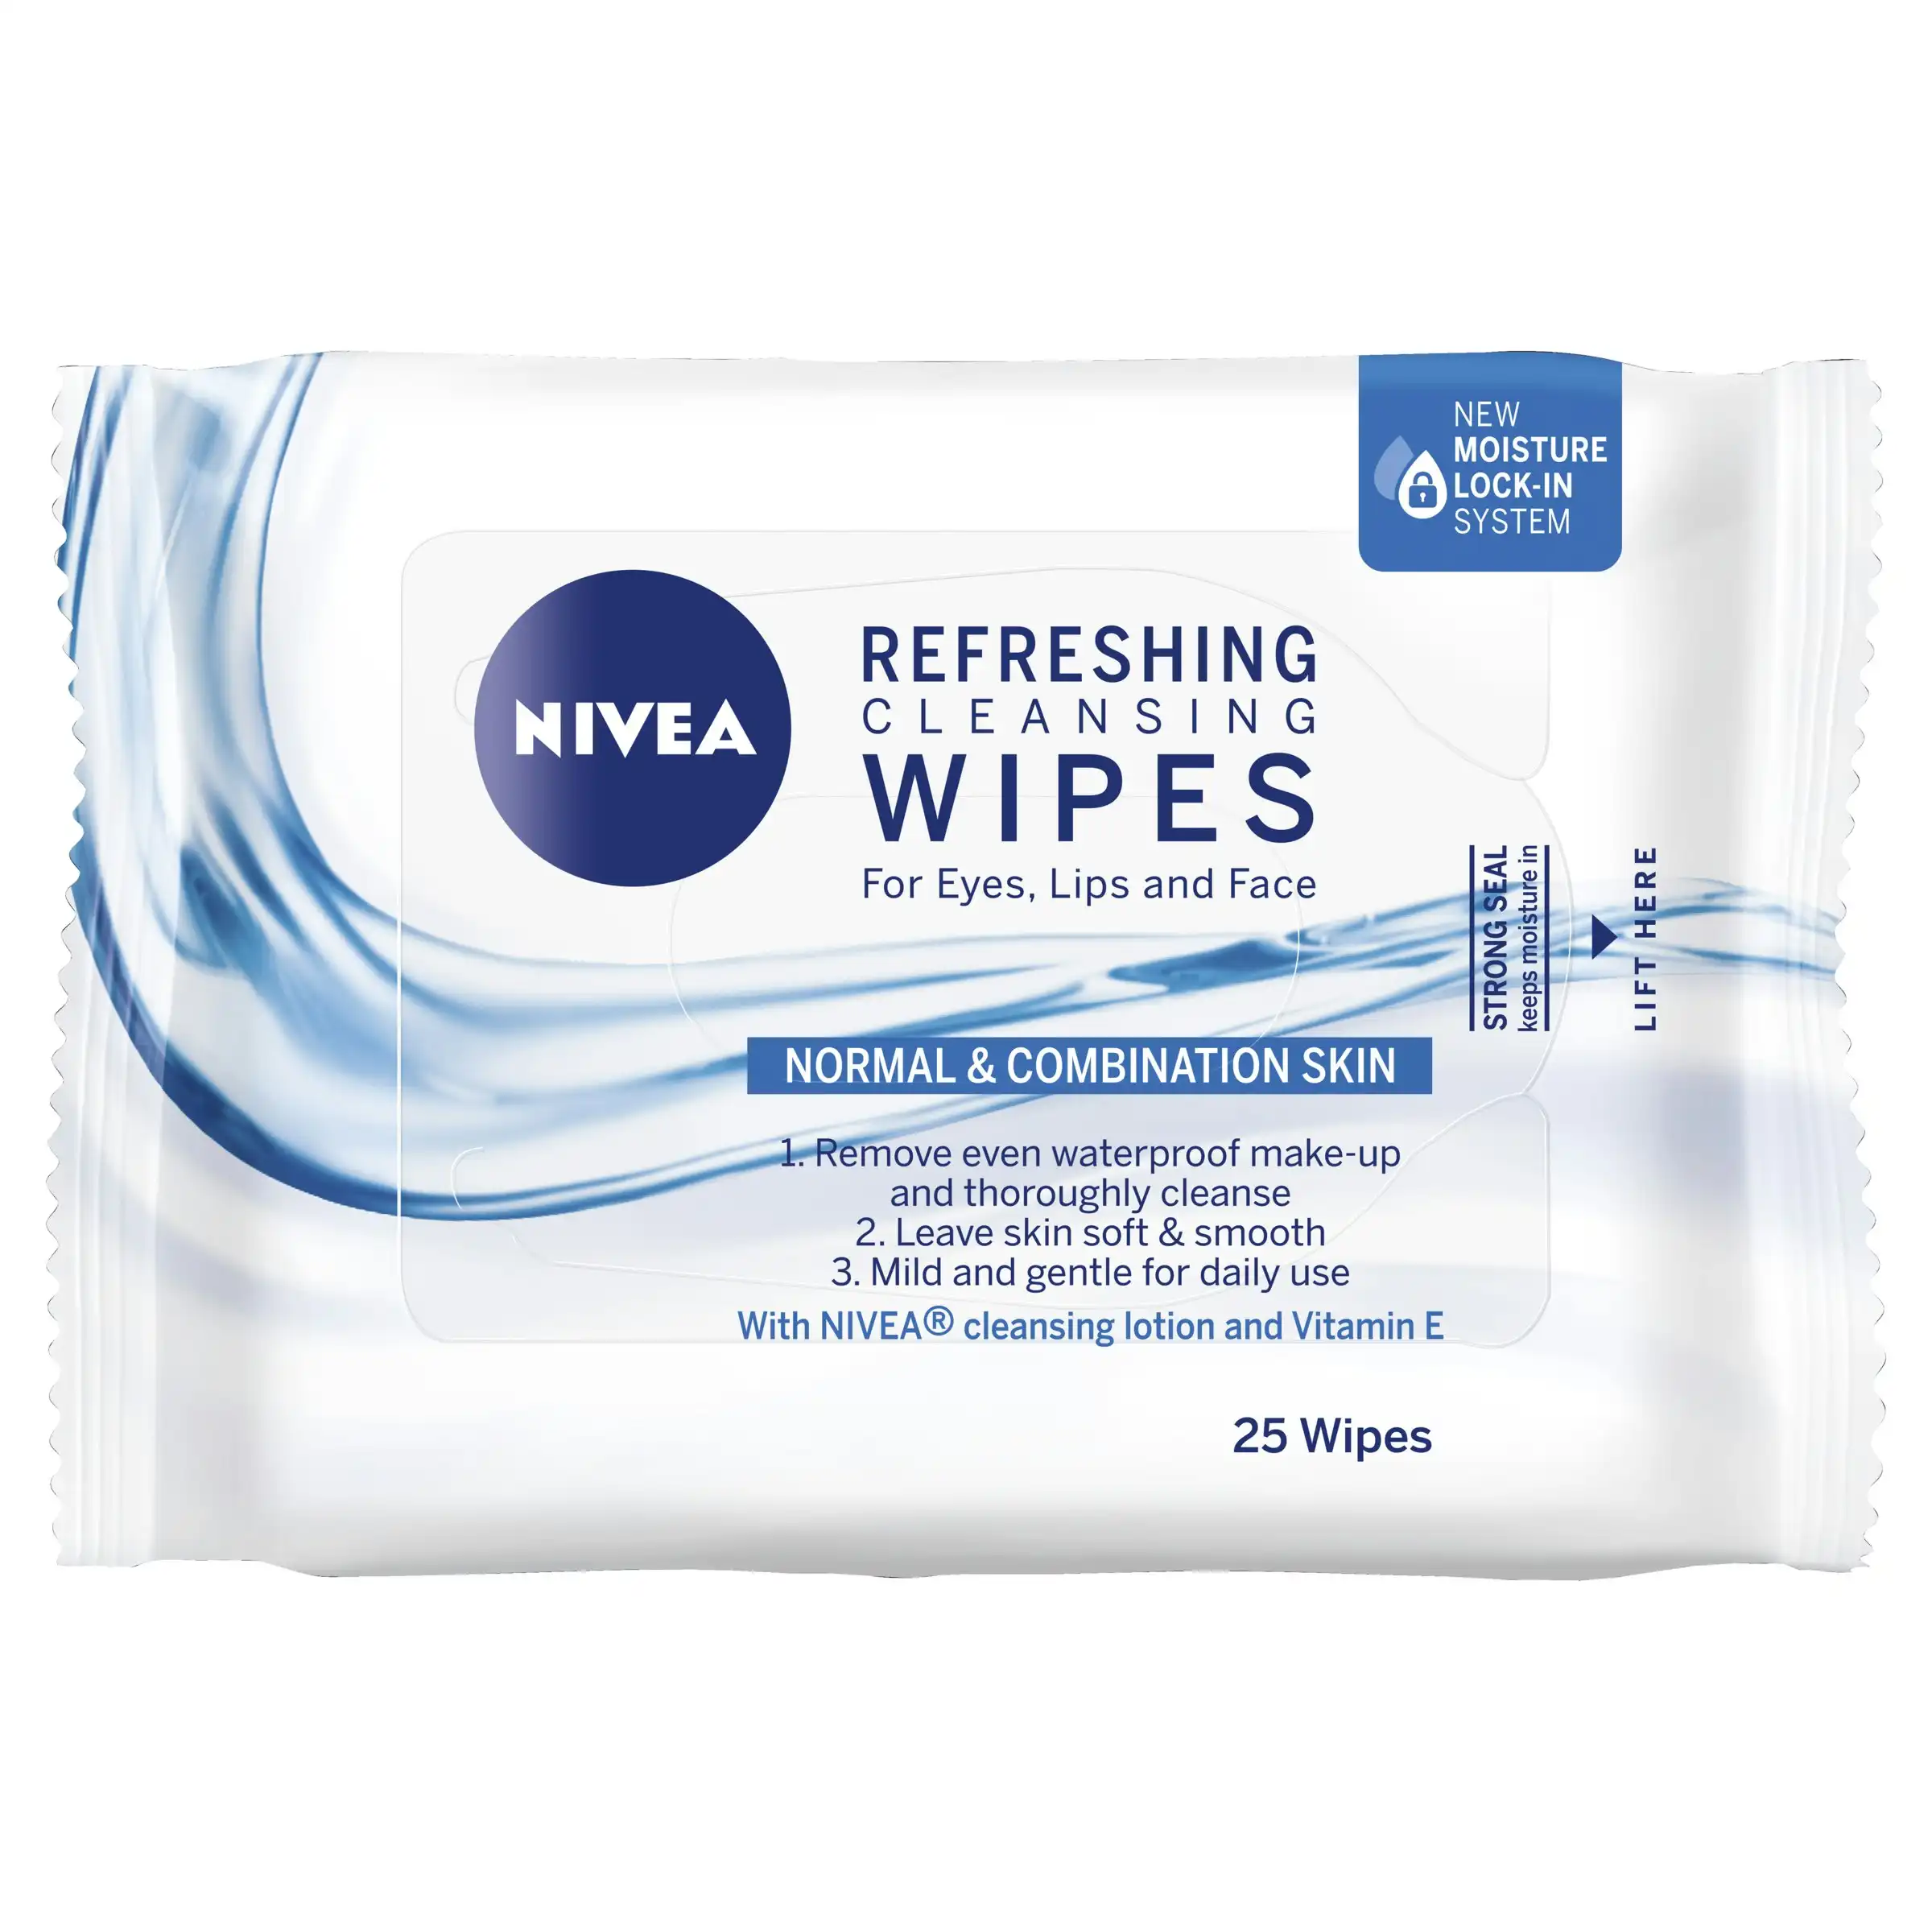 Nivea Daily Essentials Refreshing Facial Cleansing Wipes 25pcs